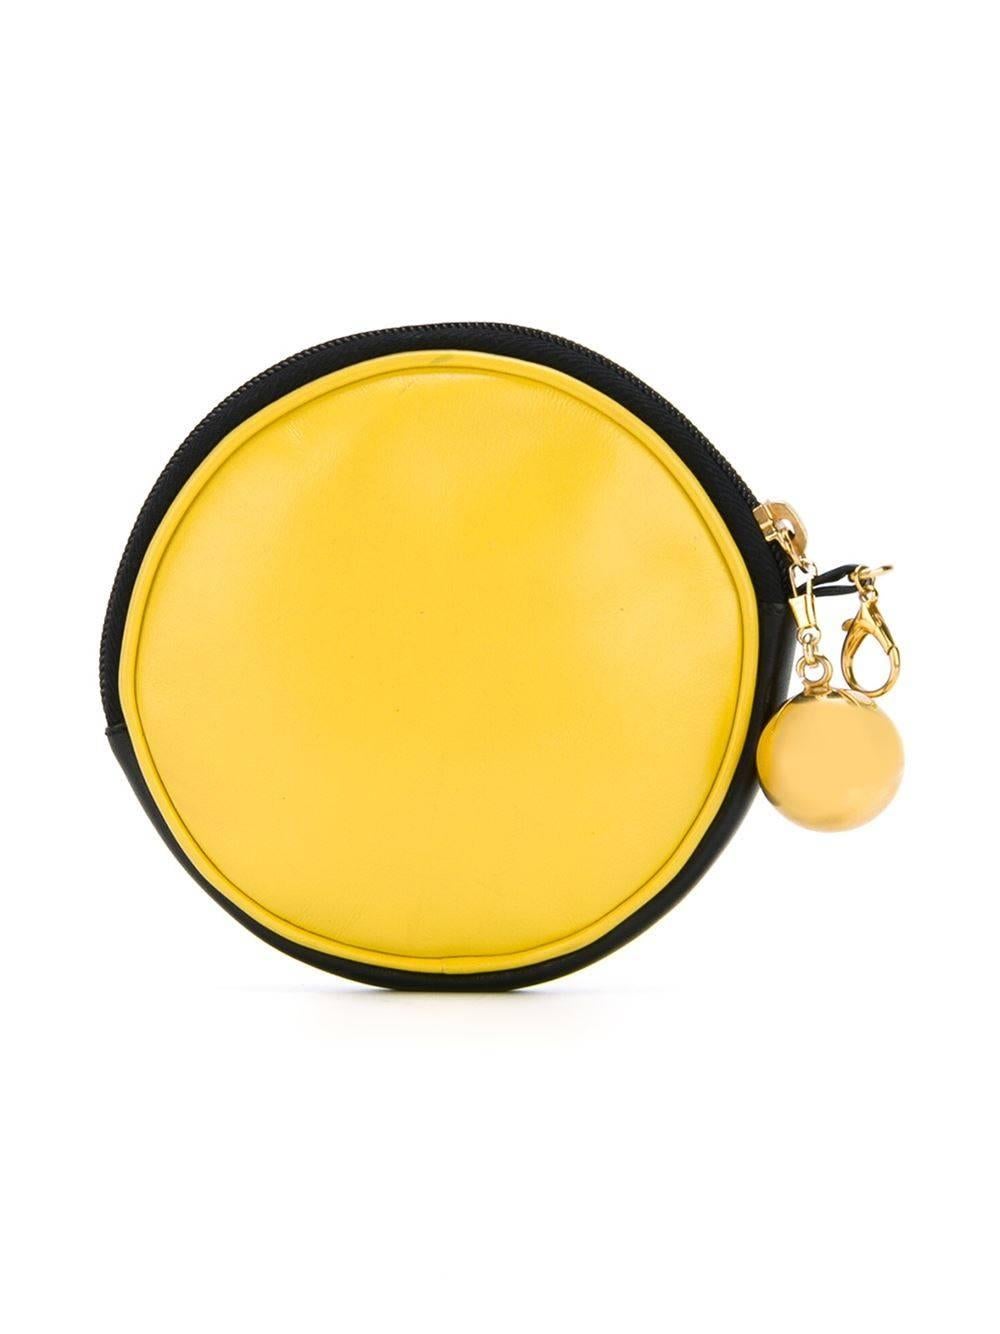 This vintage pouch from Moschino features a smiley face design on the face, a leather body, cotton interior, gold-tone hardware and an orb-detailed zip.

Colour: Yellow

Material: Leather

Measurements: width: 13cm, height: 13cm, depth: